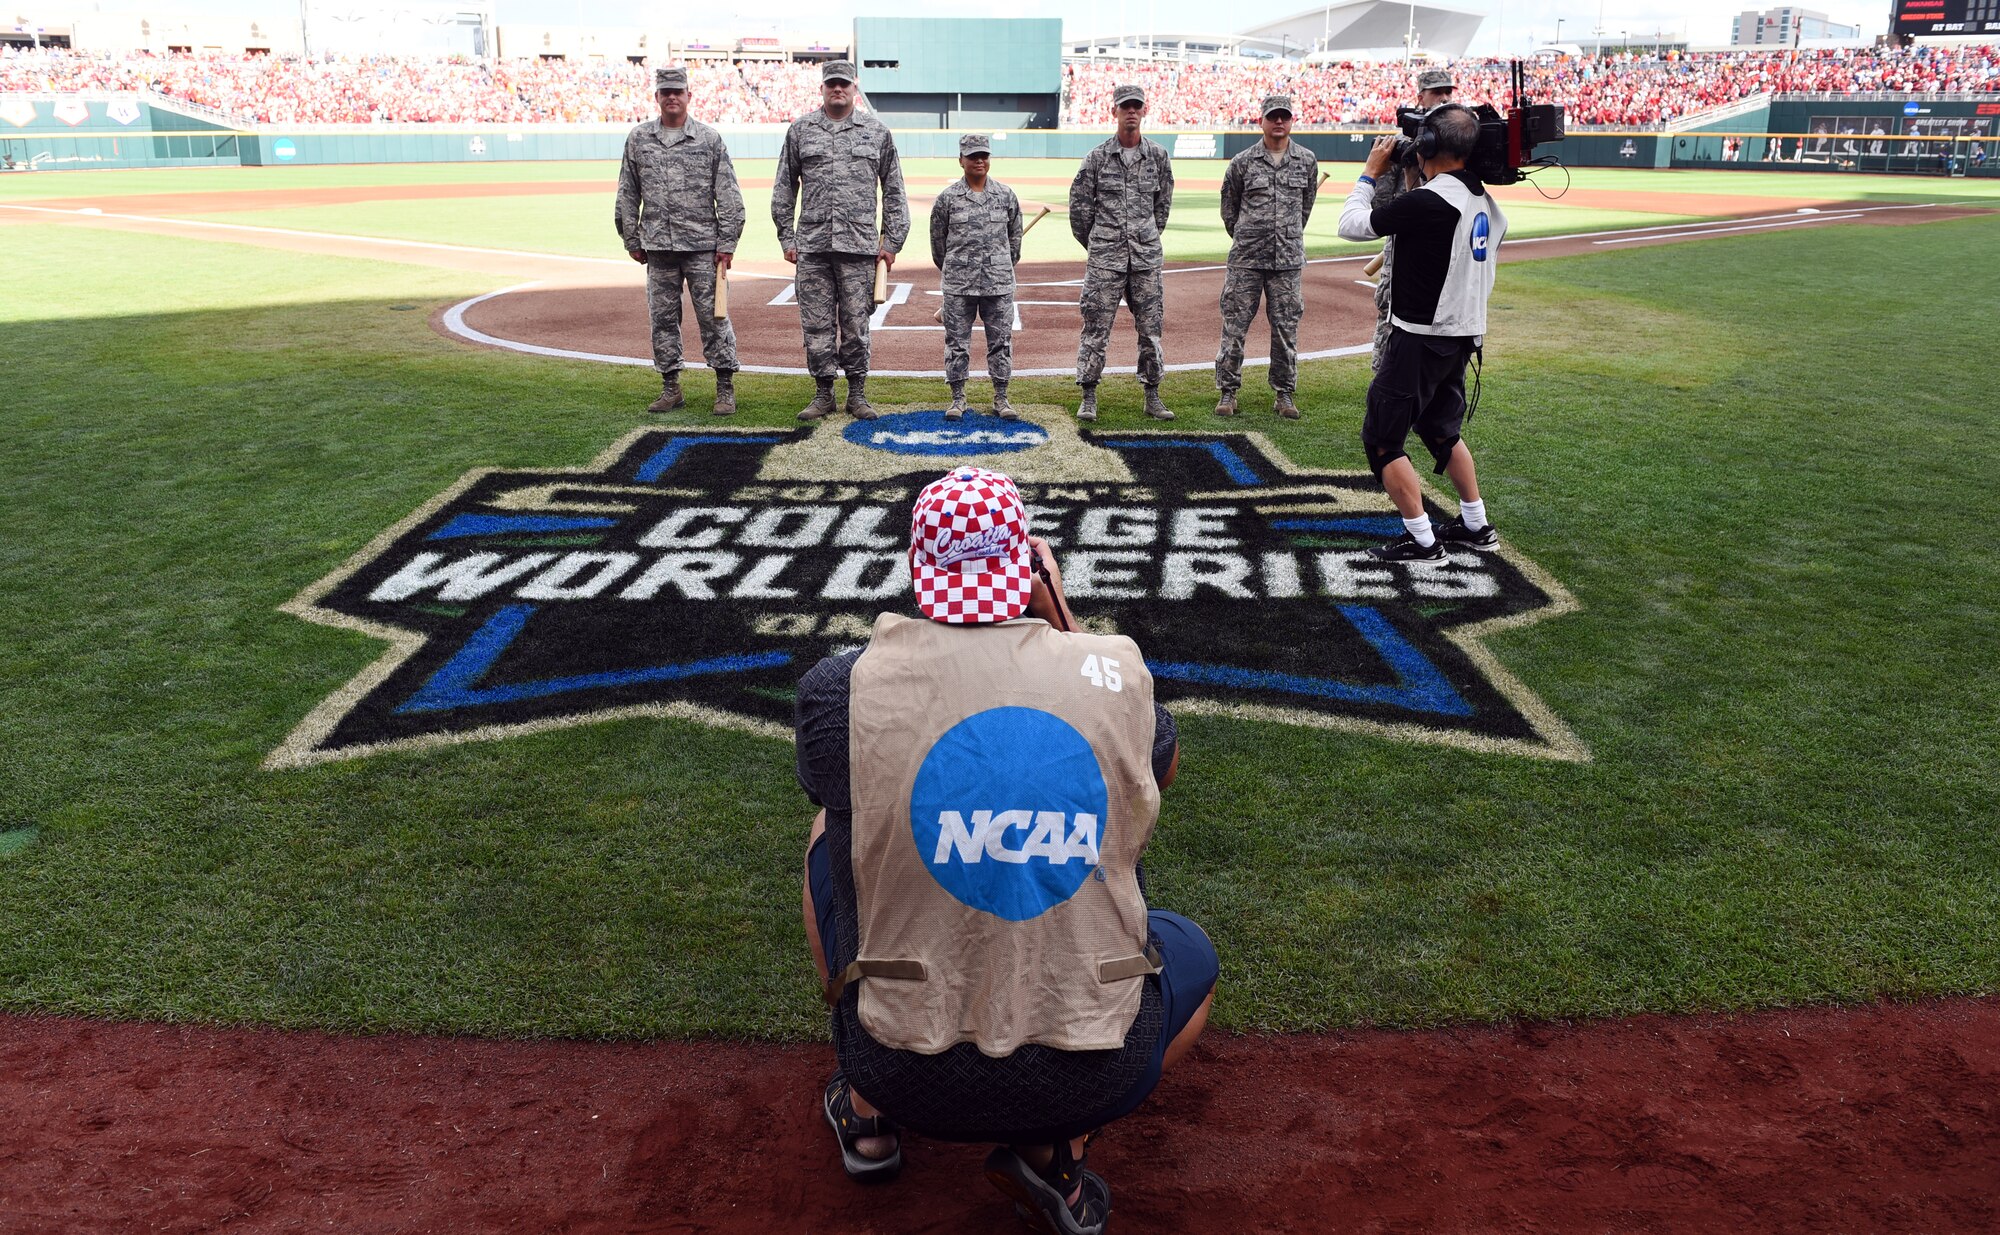 Airmen stand at home plate of TD Ameritrade Park for game one of the National Collegiate Athletic Association Men’s College World Series Omaha, Nebraska, June 26, 2018.